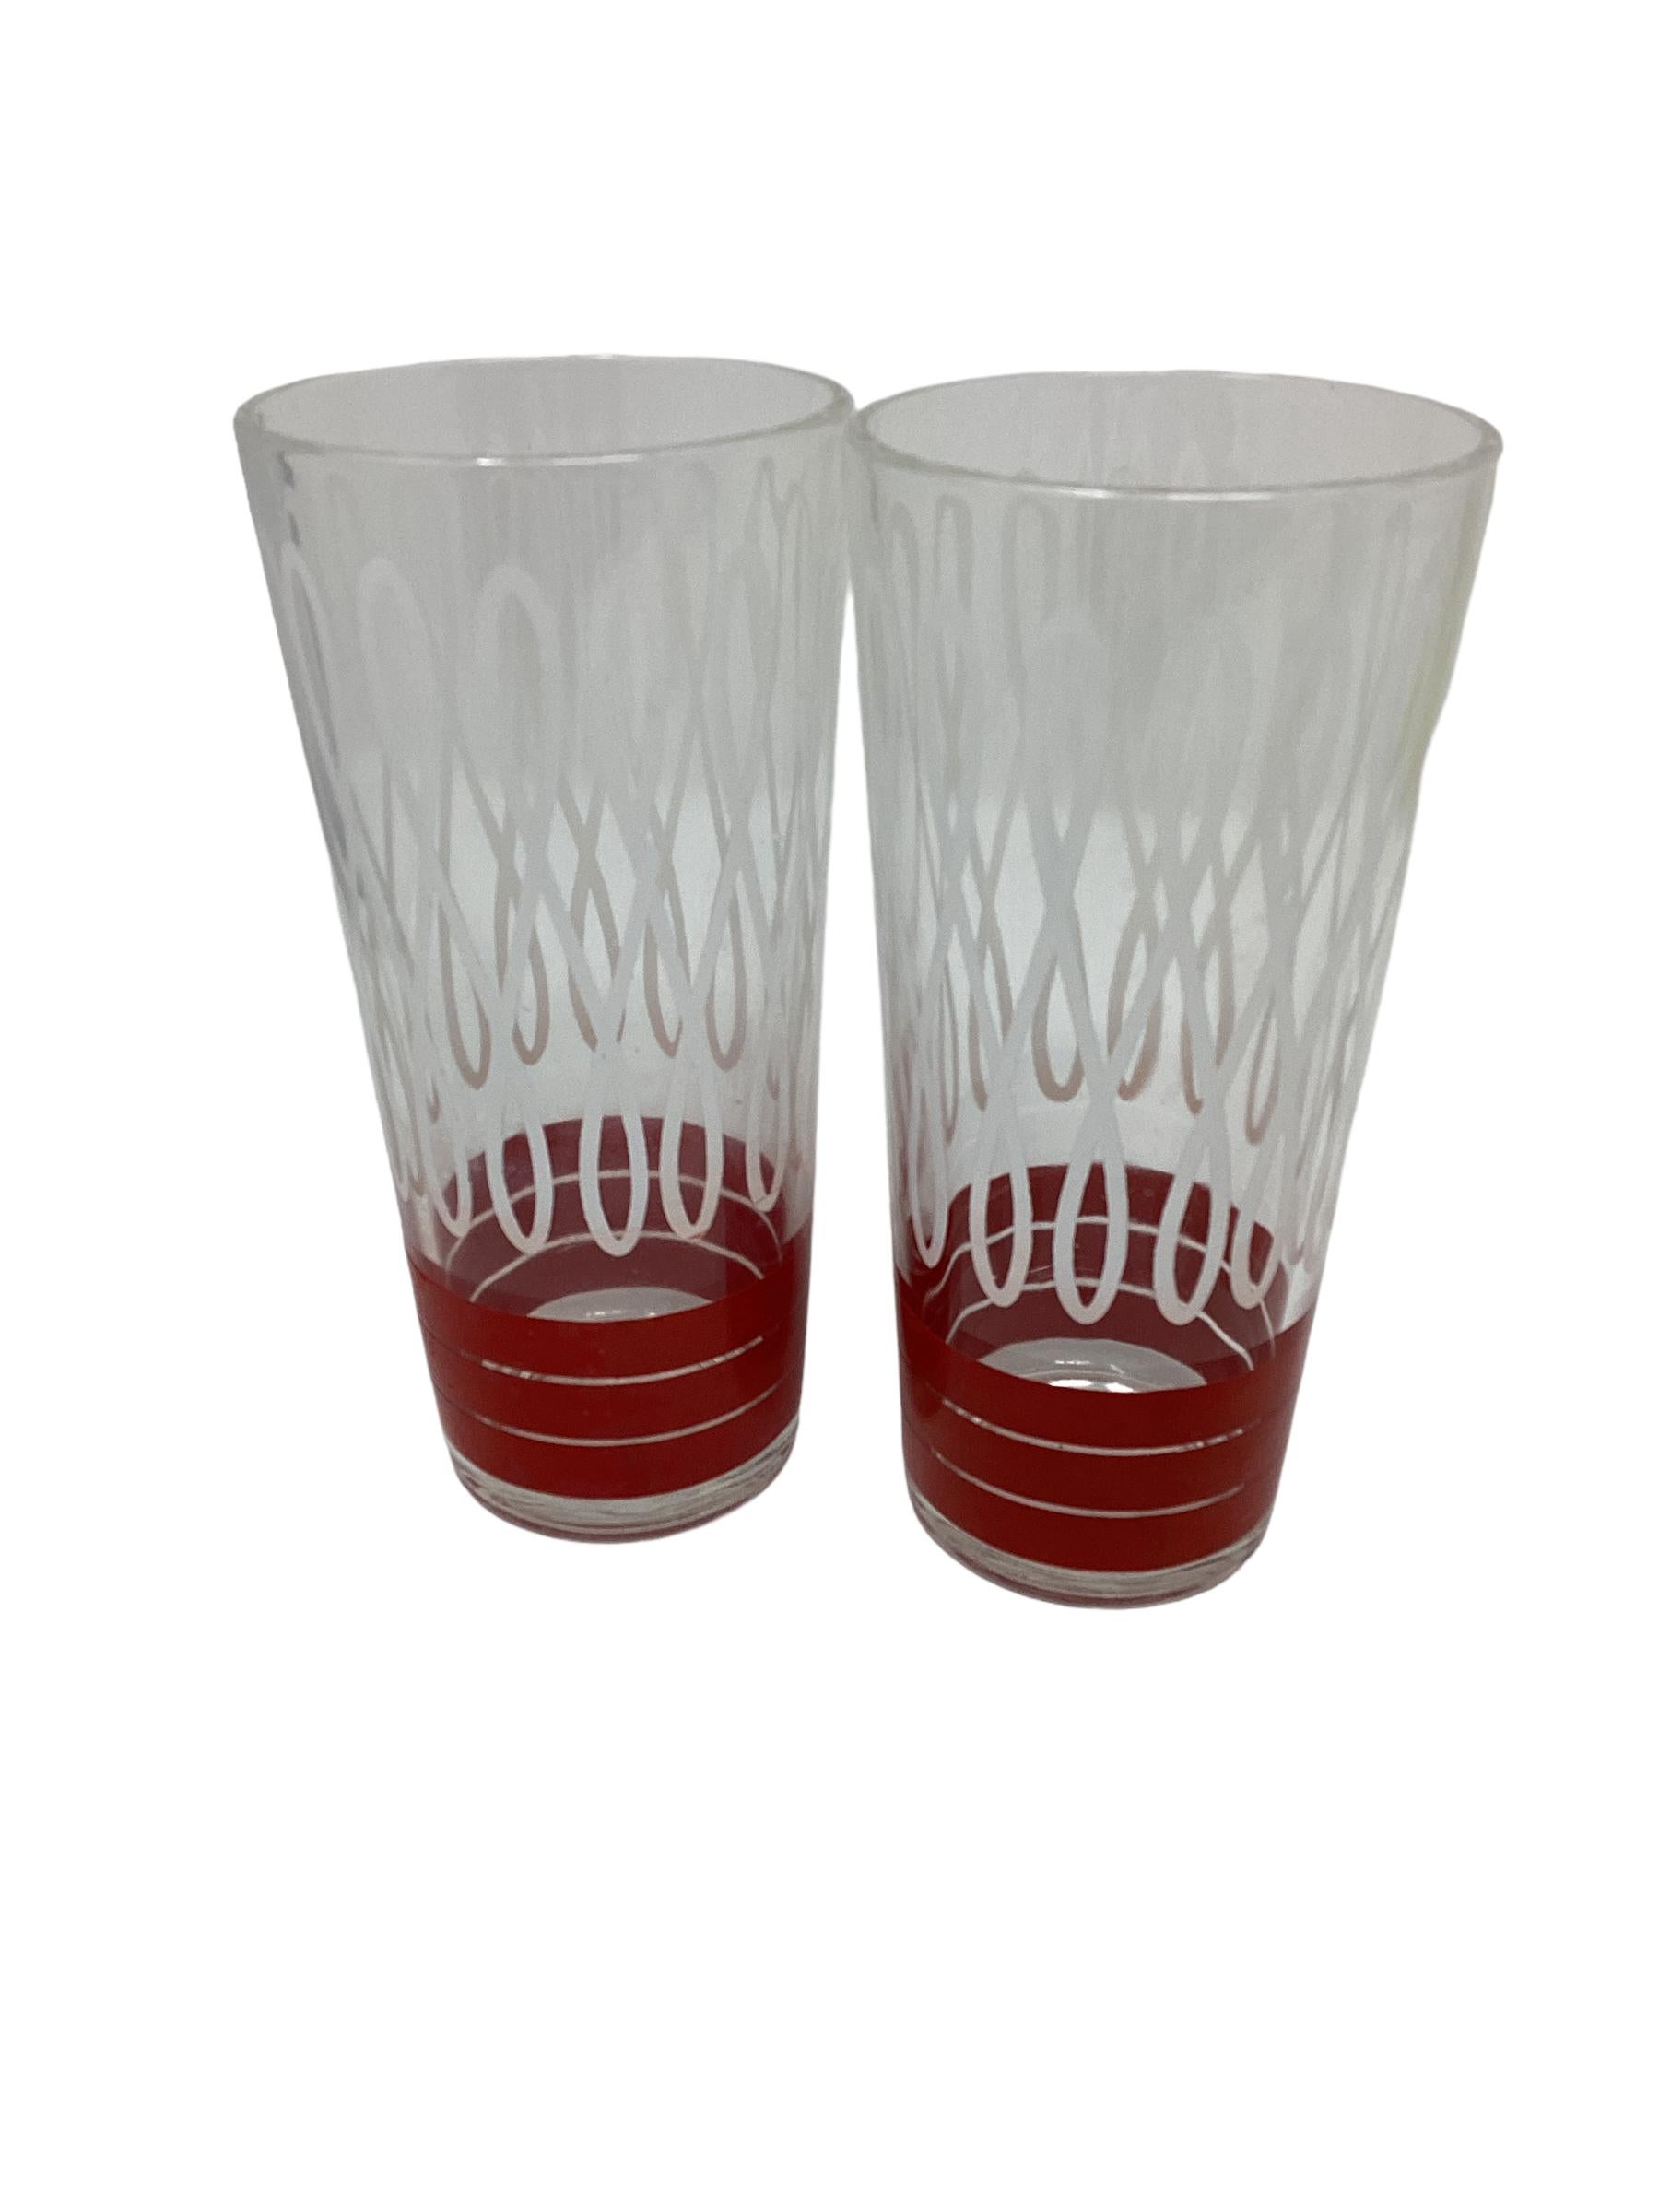 Set of 8 Vintage Tumblers with White Swirled Design and Colored Bands  In Good Condition For Sale In Chapel Hill, NC